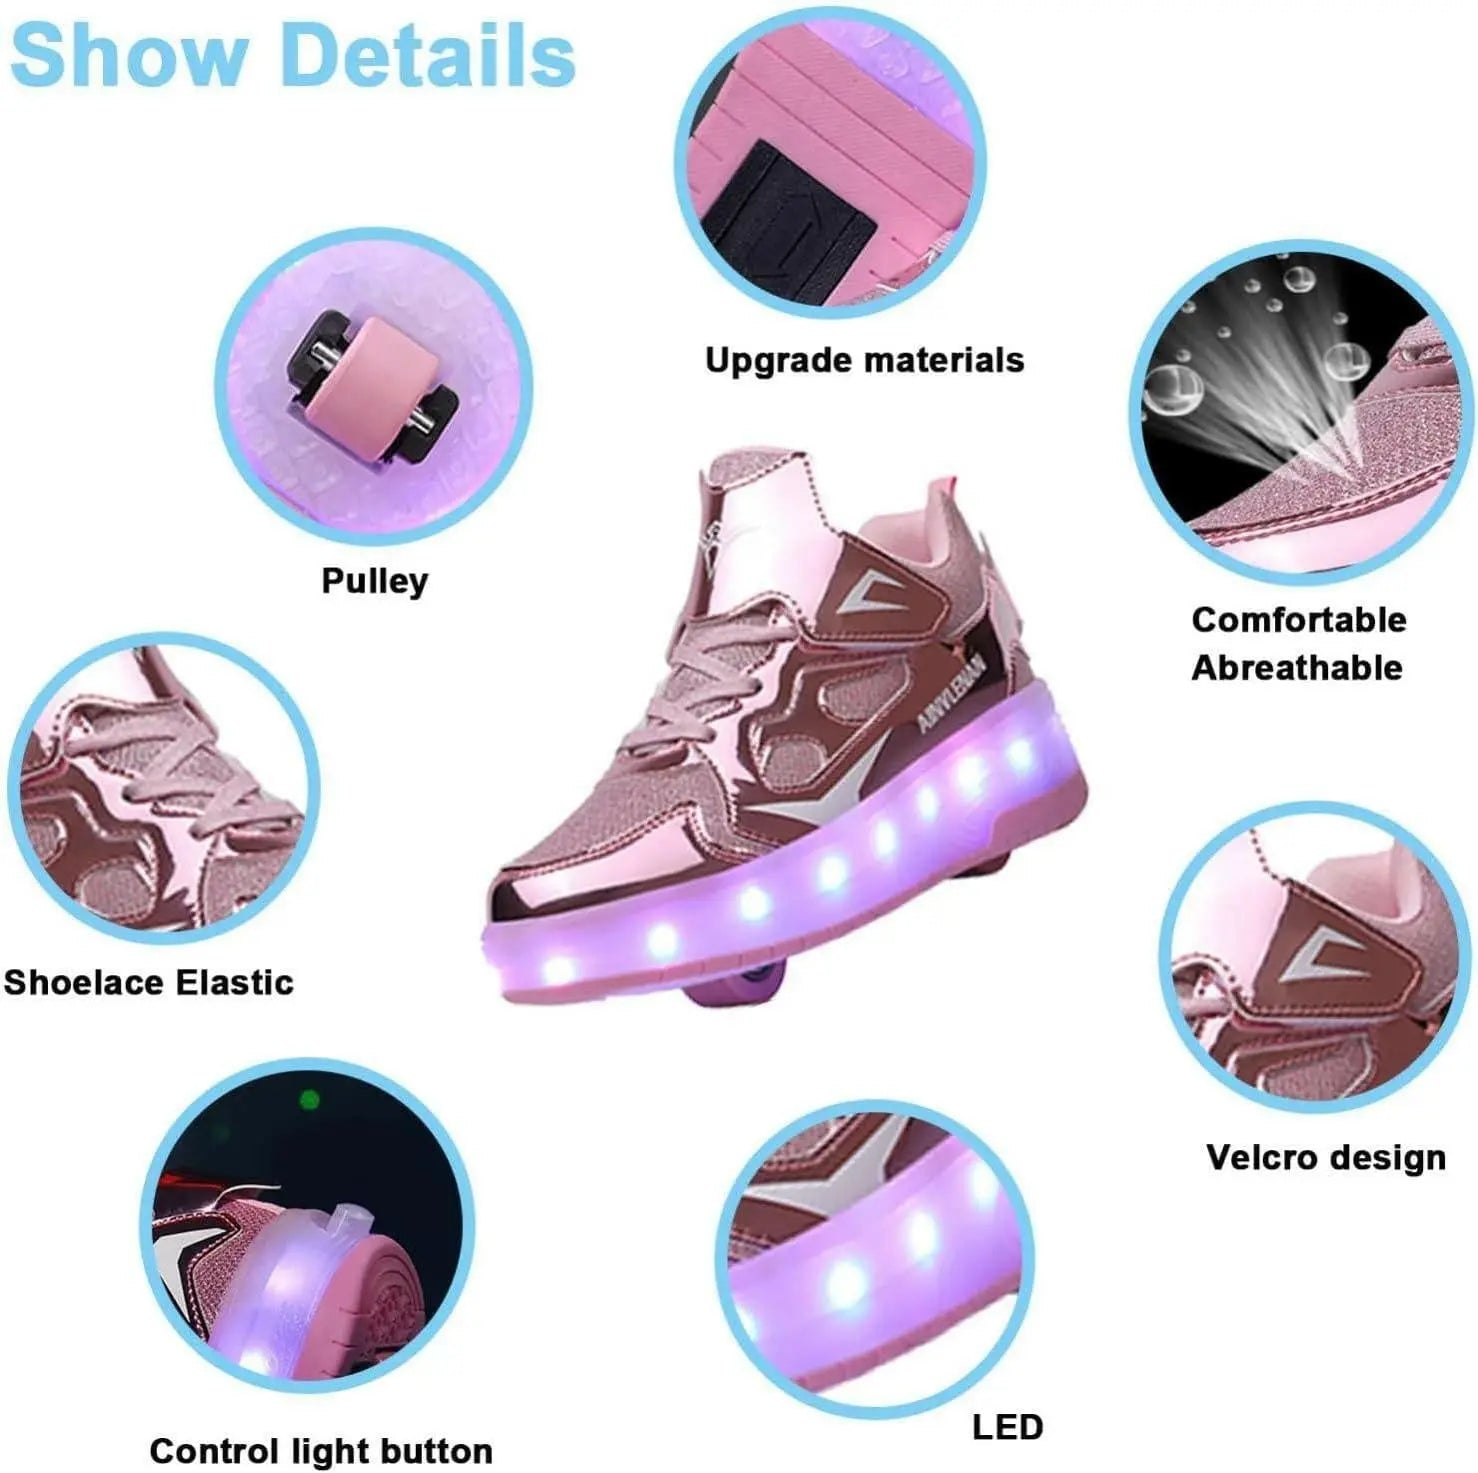 XAQA Upgraded USB Rechargeable Sparkle Skate LED Light up shoes with Removable Wheels & Unique Design - Perfect Birthday and Christmas Gift for Kids